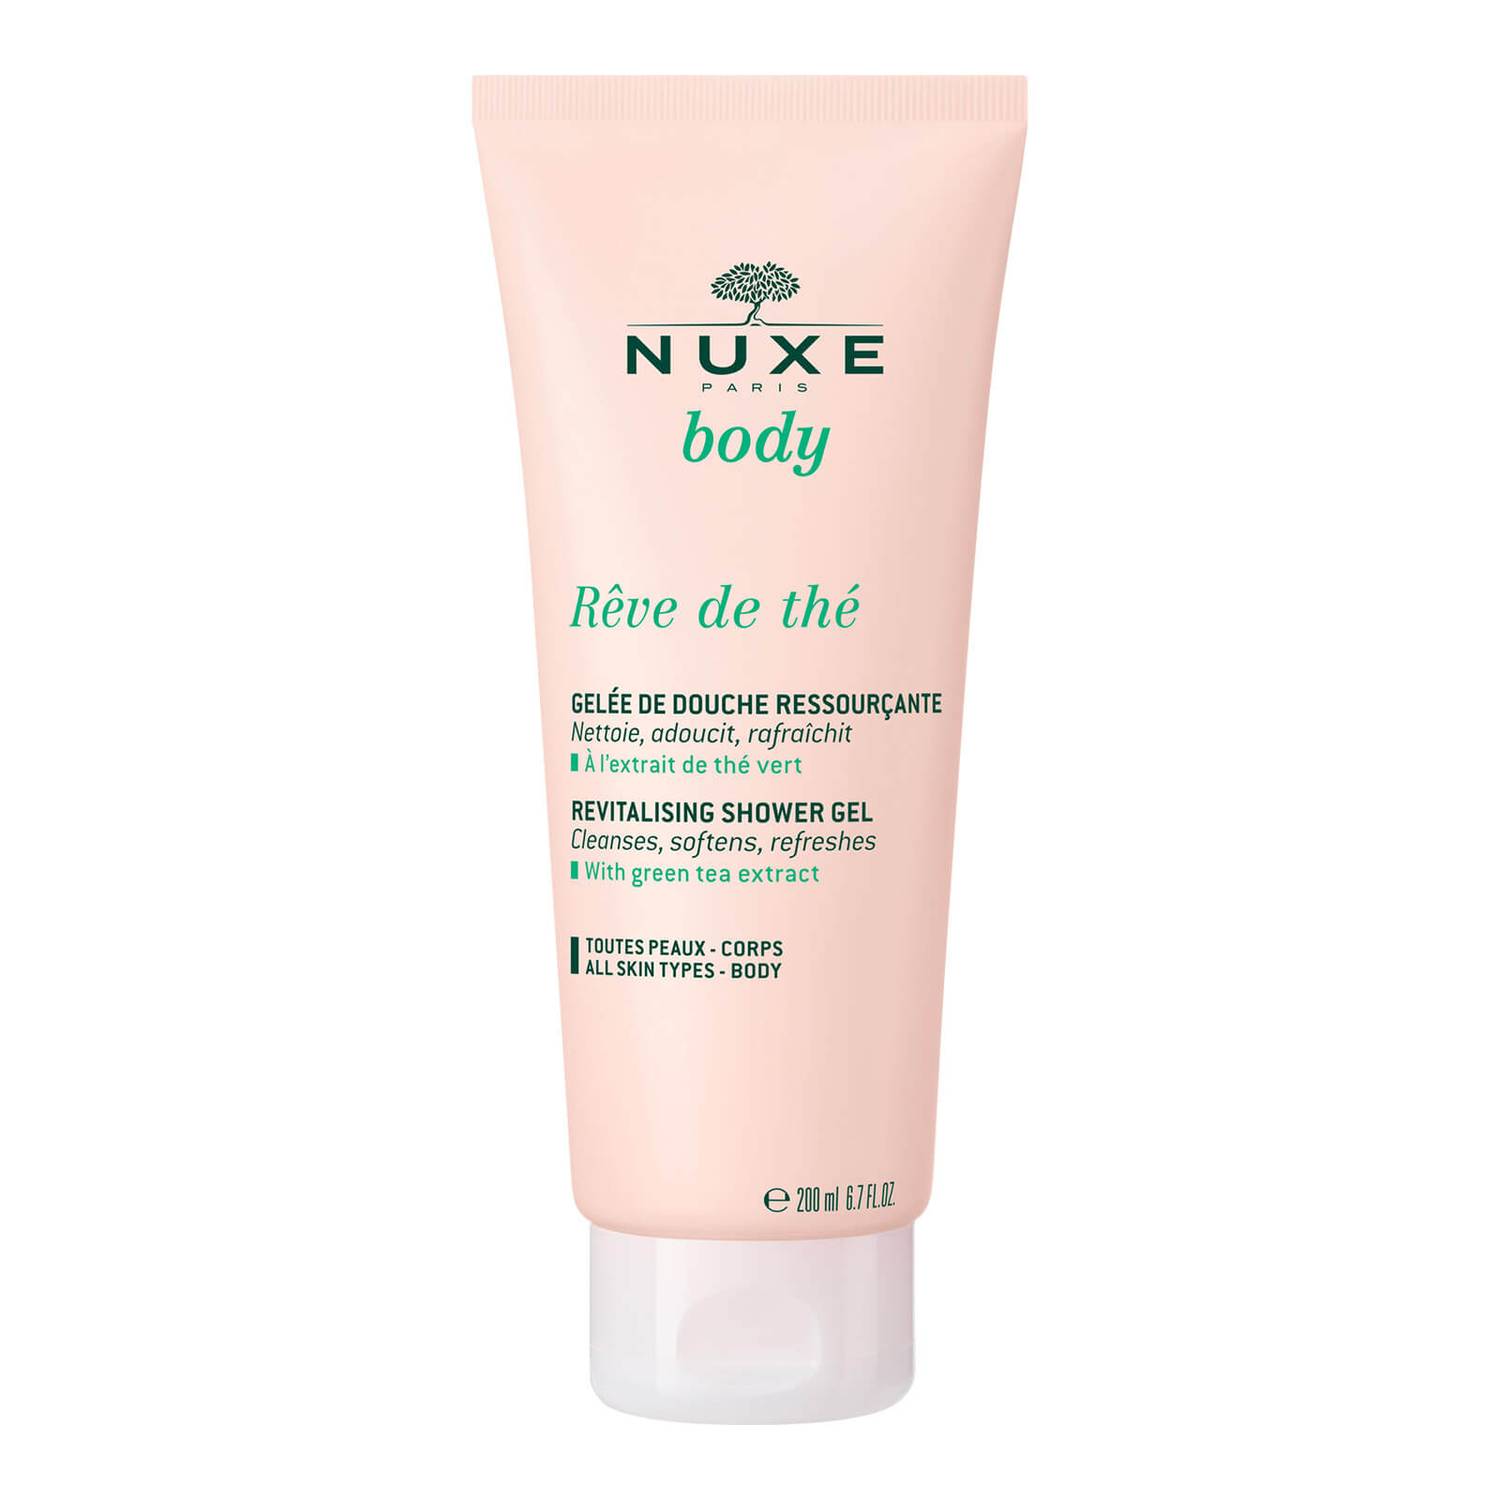 Nuxe Rêve de Thé Revitalizing Shower Gel with a very subtle smell leaves your skin smooth and refreshed.